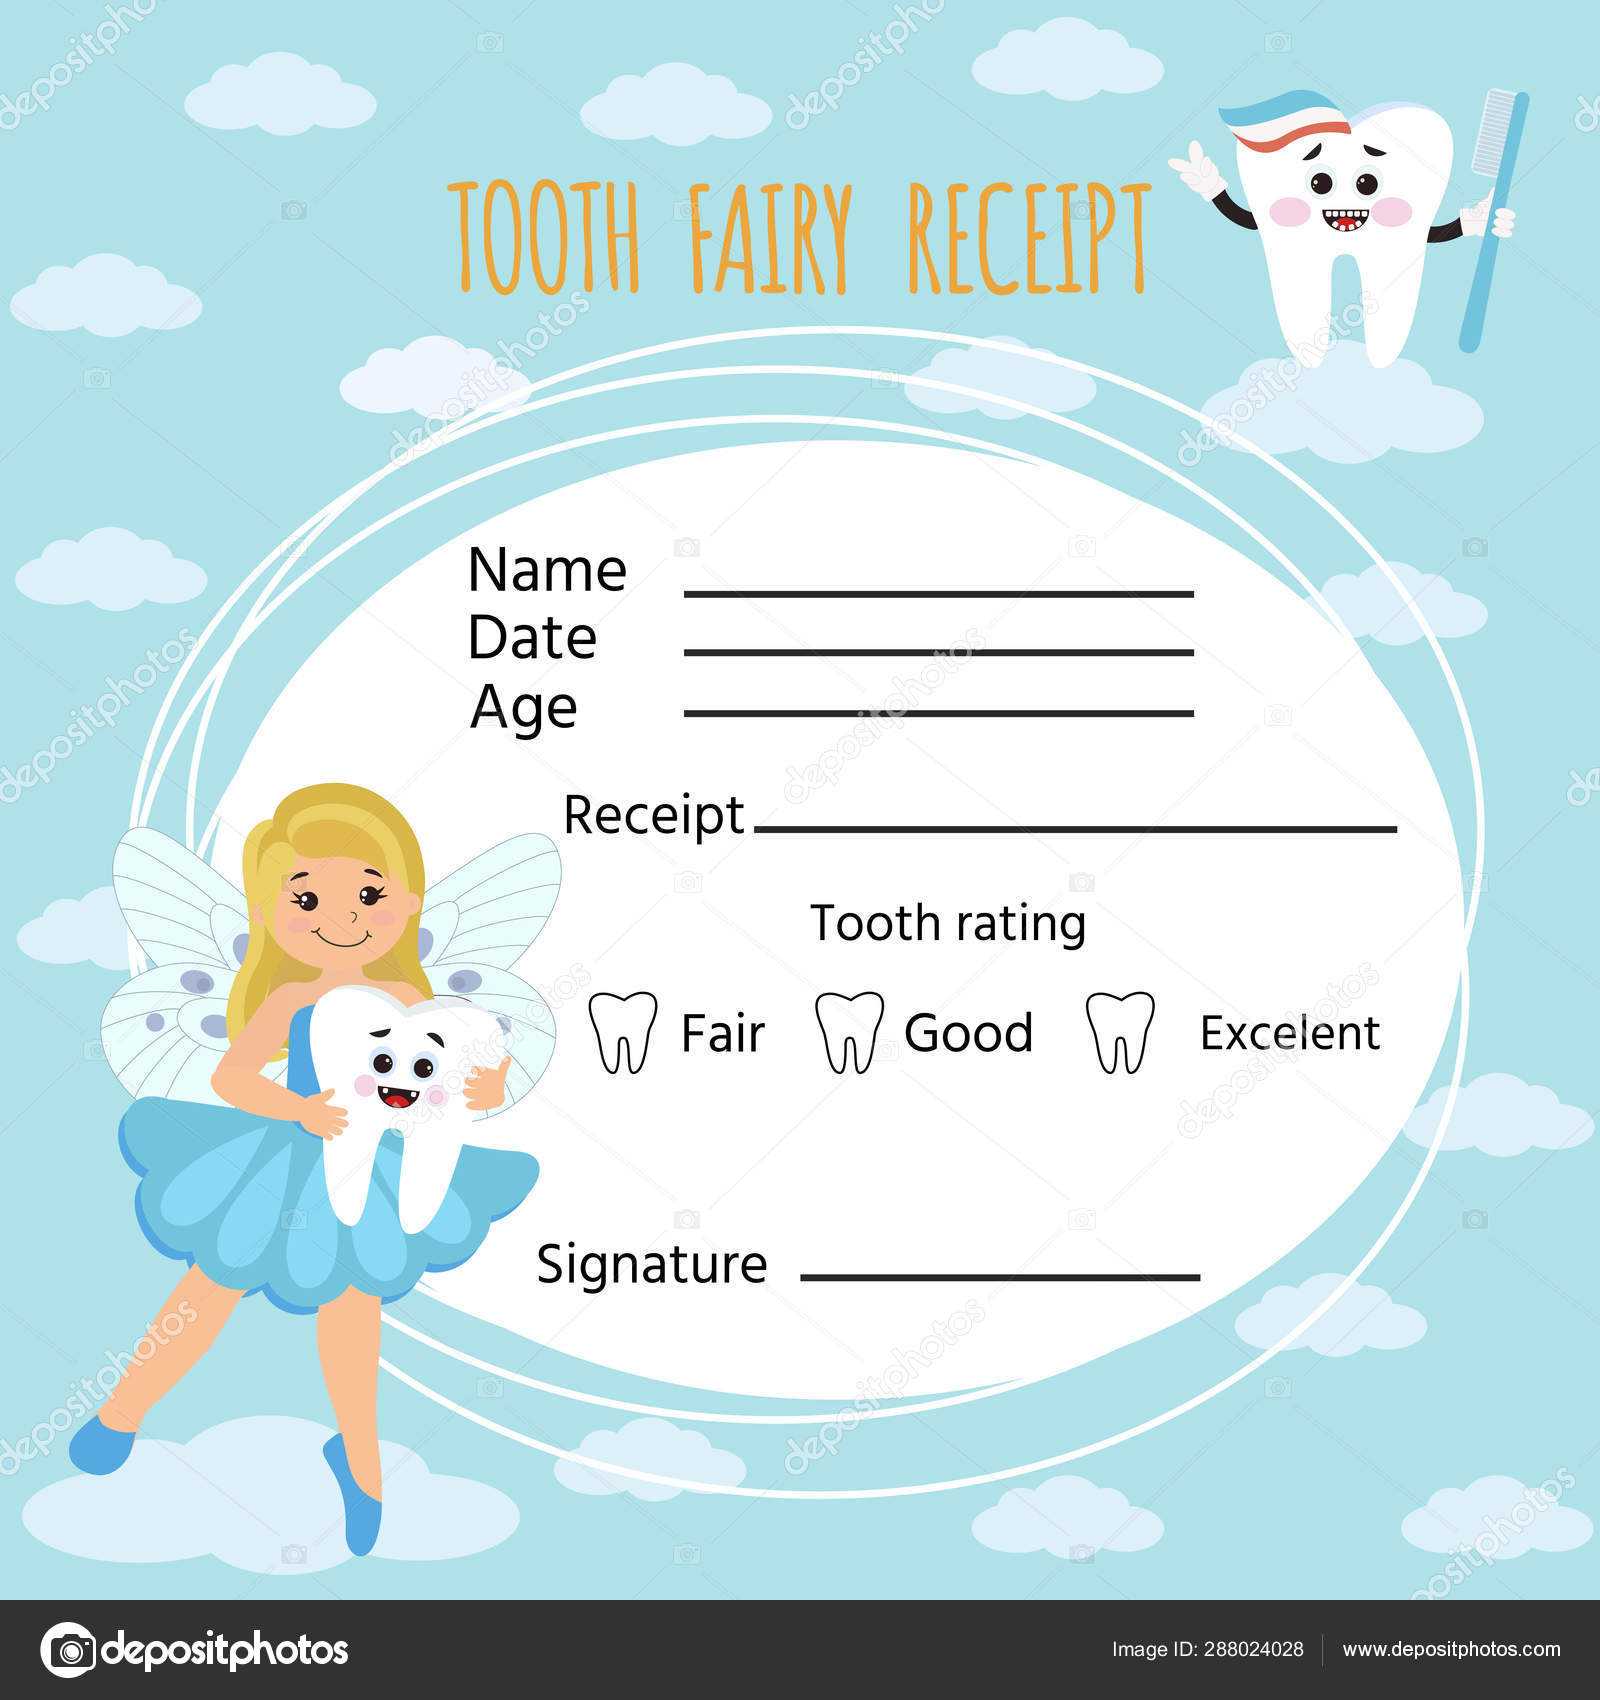 Cute Tooth Fairy Receipt Certificate. Diploma Fun Design Within Tooth Fairy Certificate Template Free